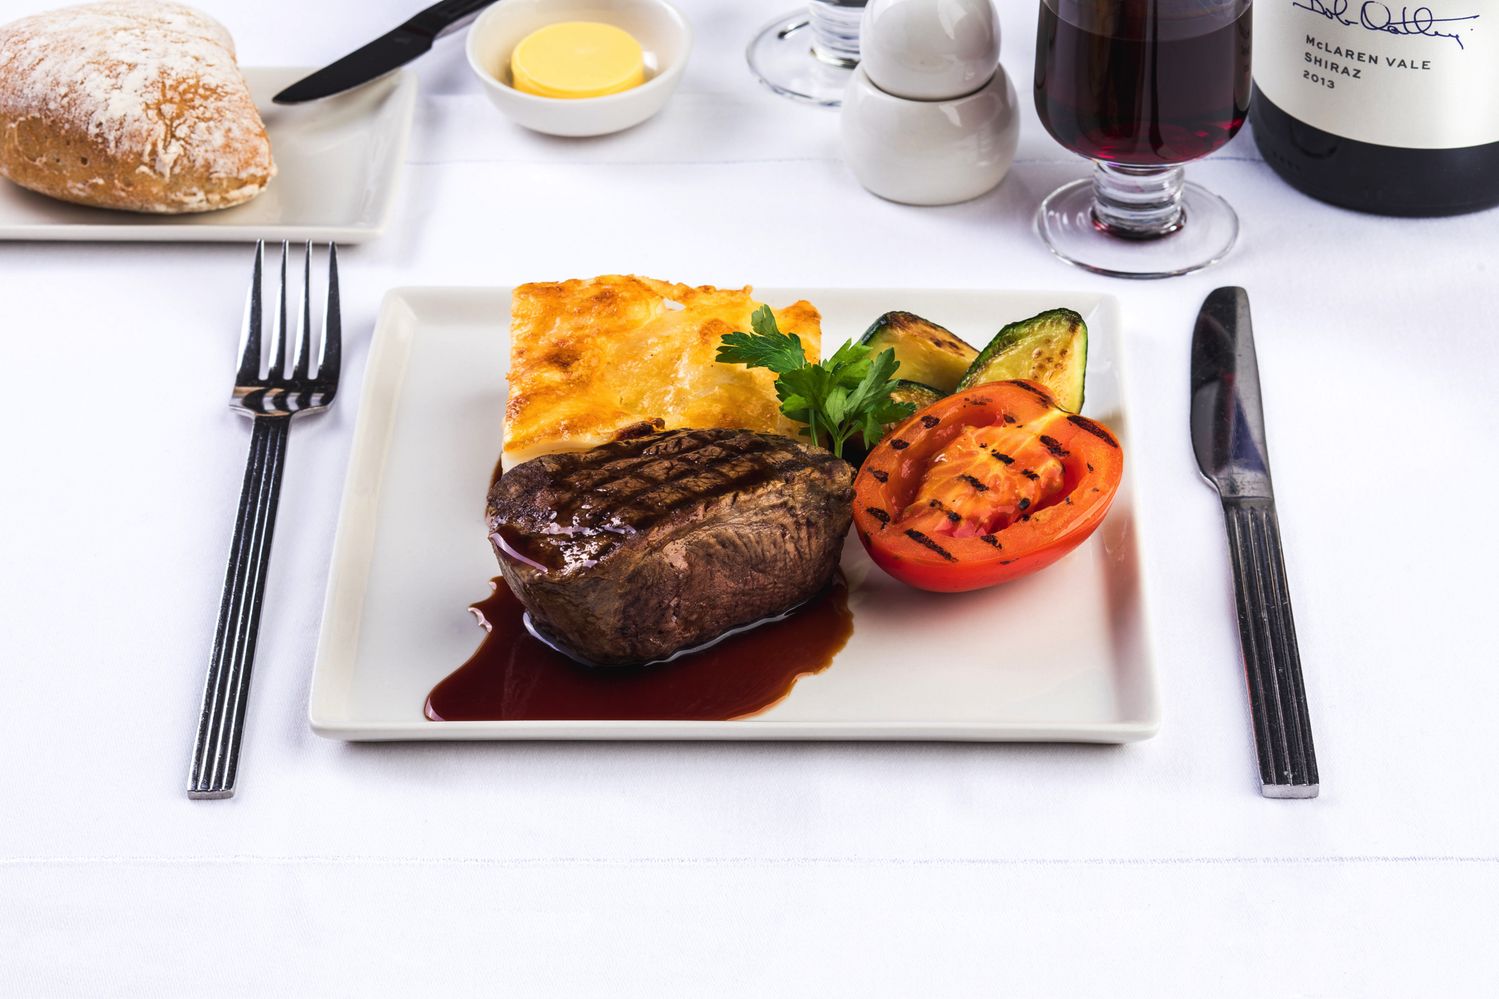 Grilled beef fllet: Grilled Australian beef fllet with a red wine veal jus reduction, slow baked potato and cream gratin, served with a selection of grilled vegetables.